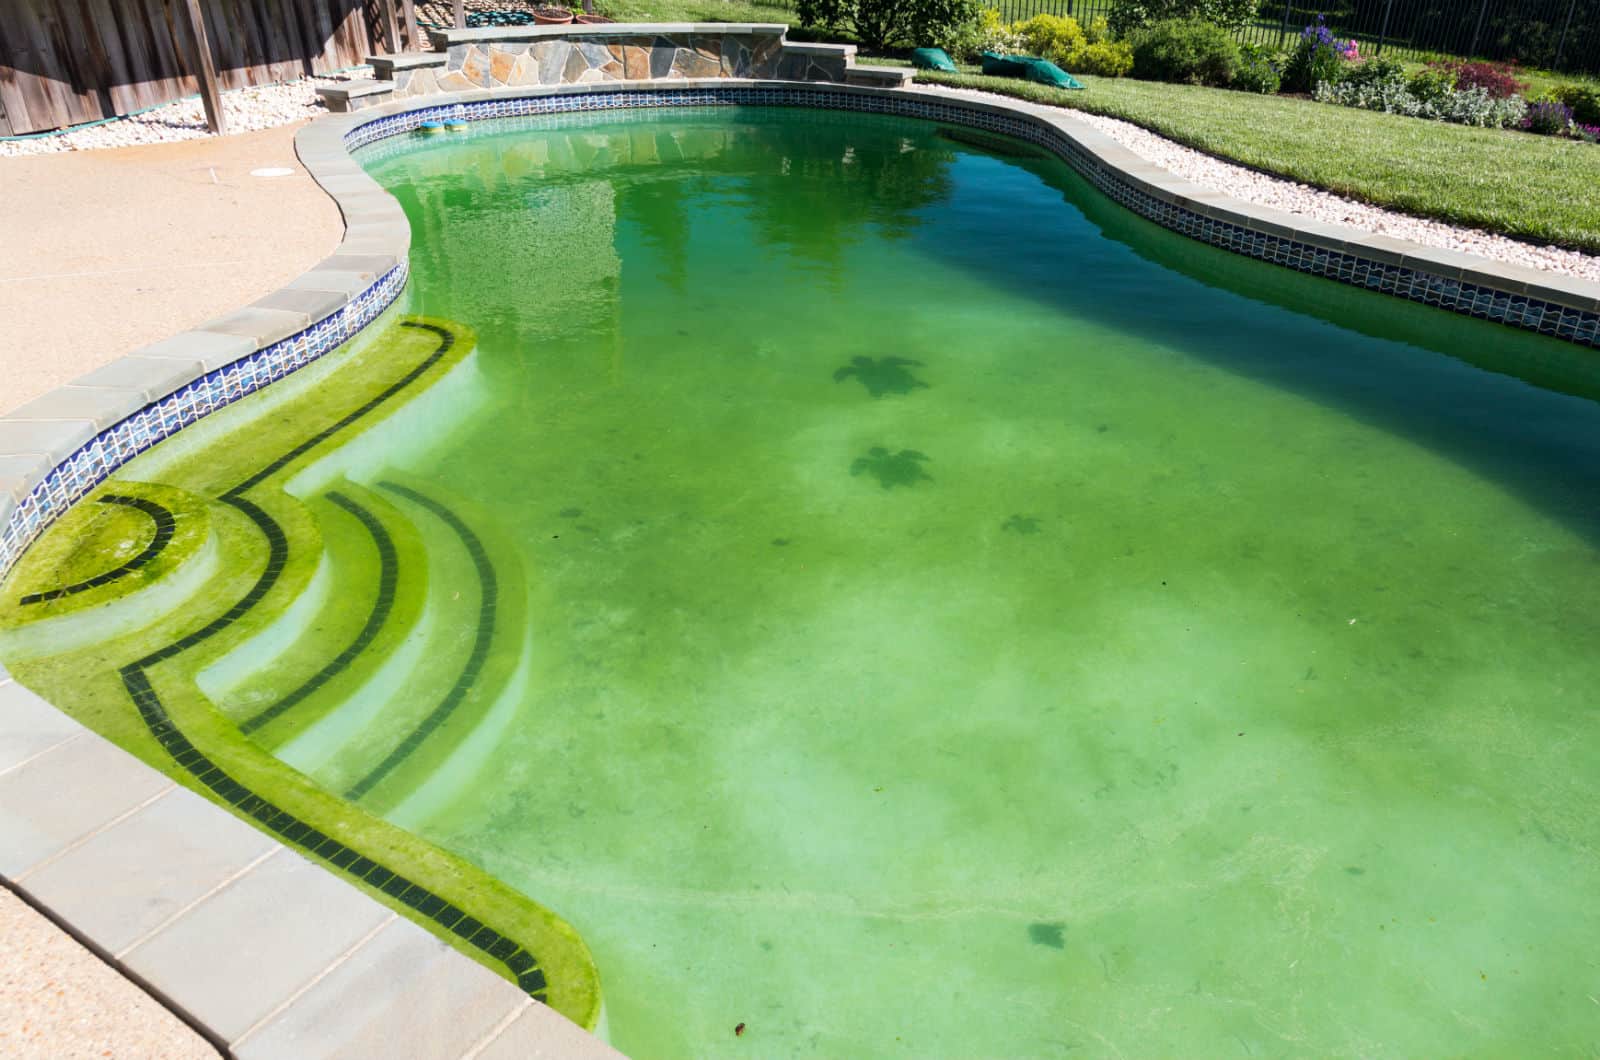 Extra Chemicals and Pool Algae Problems in Huntington Beach,Ca.